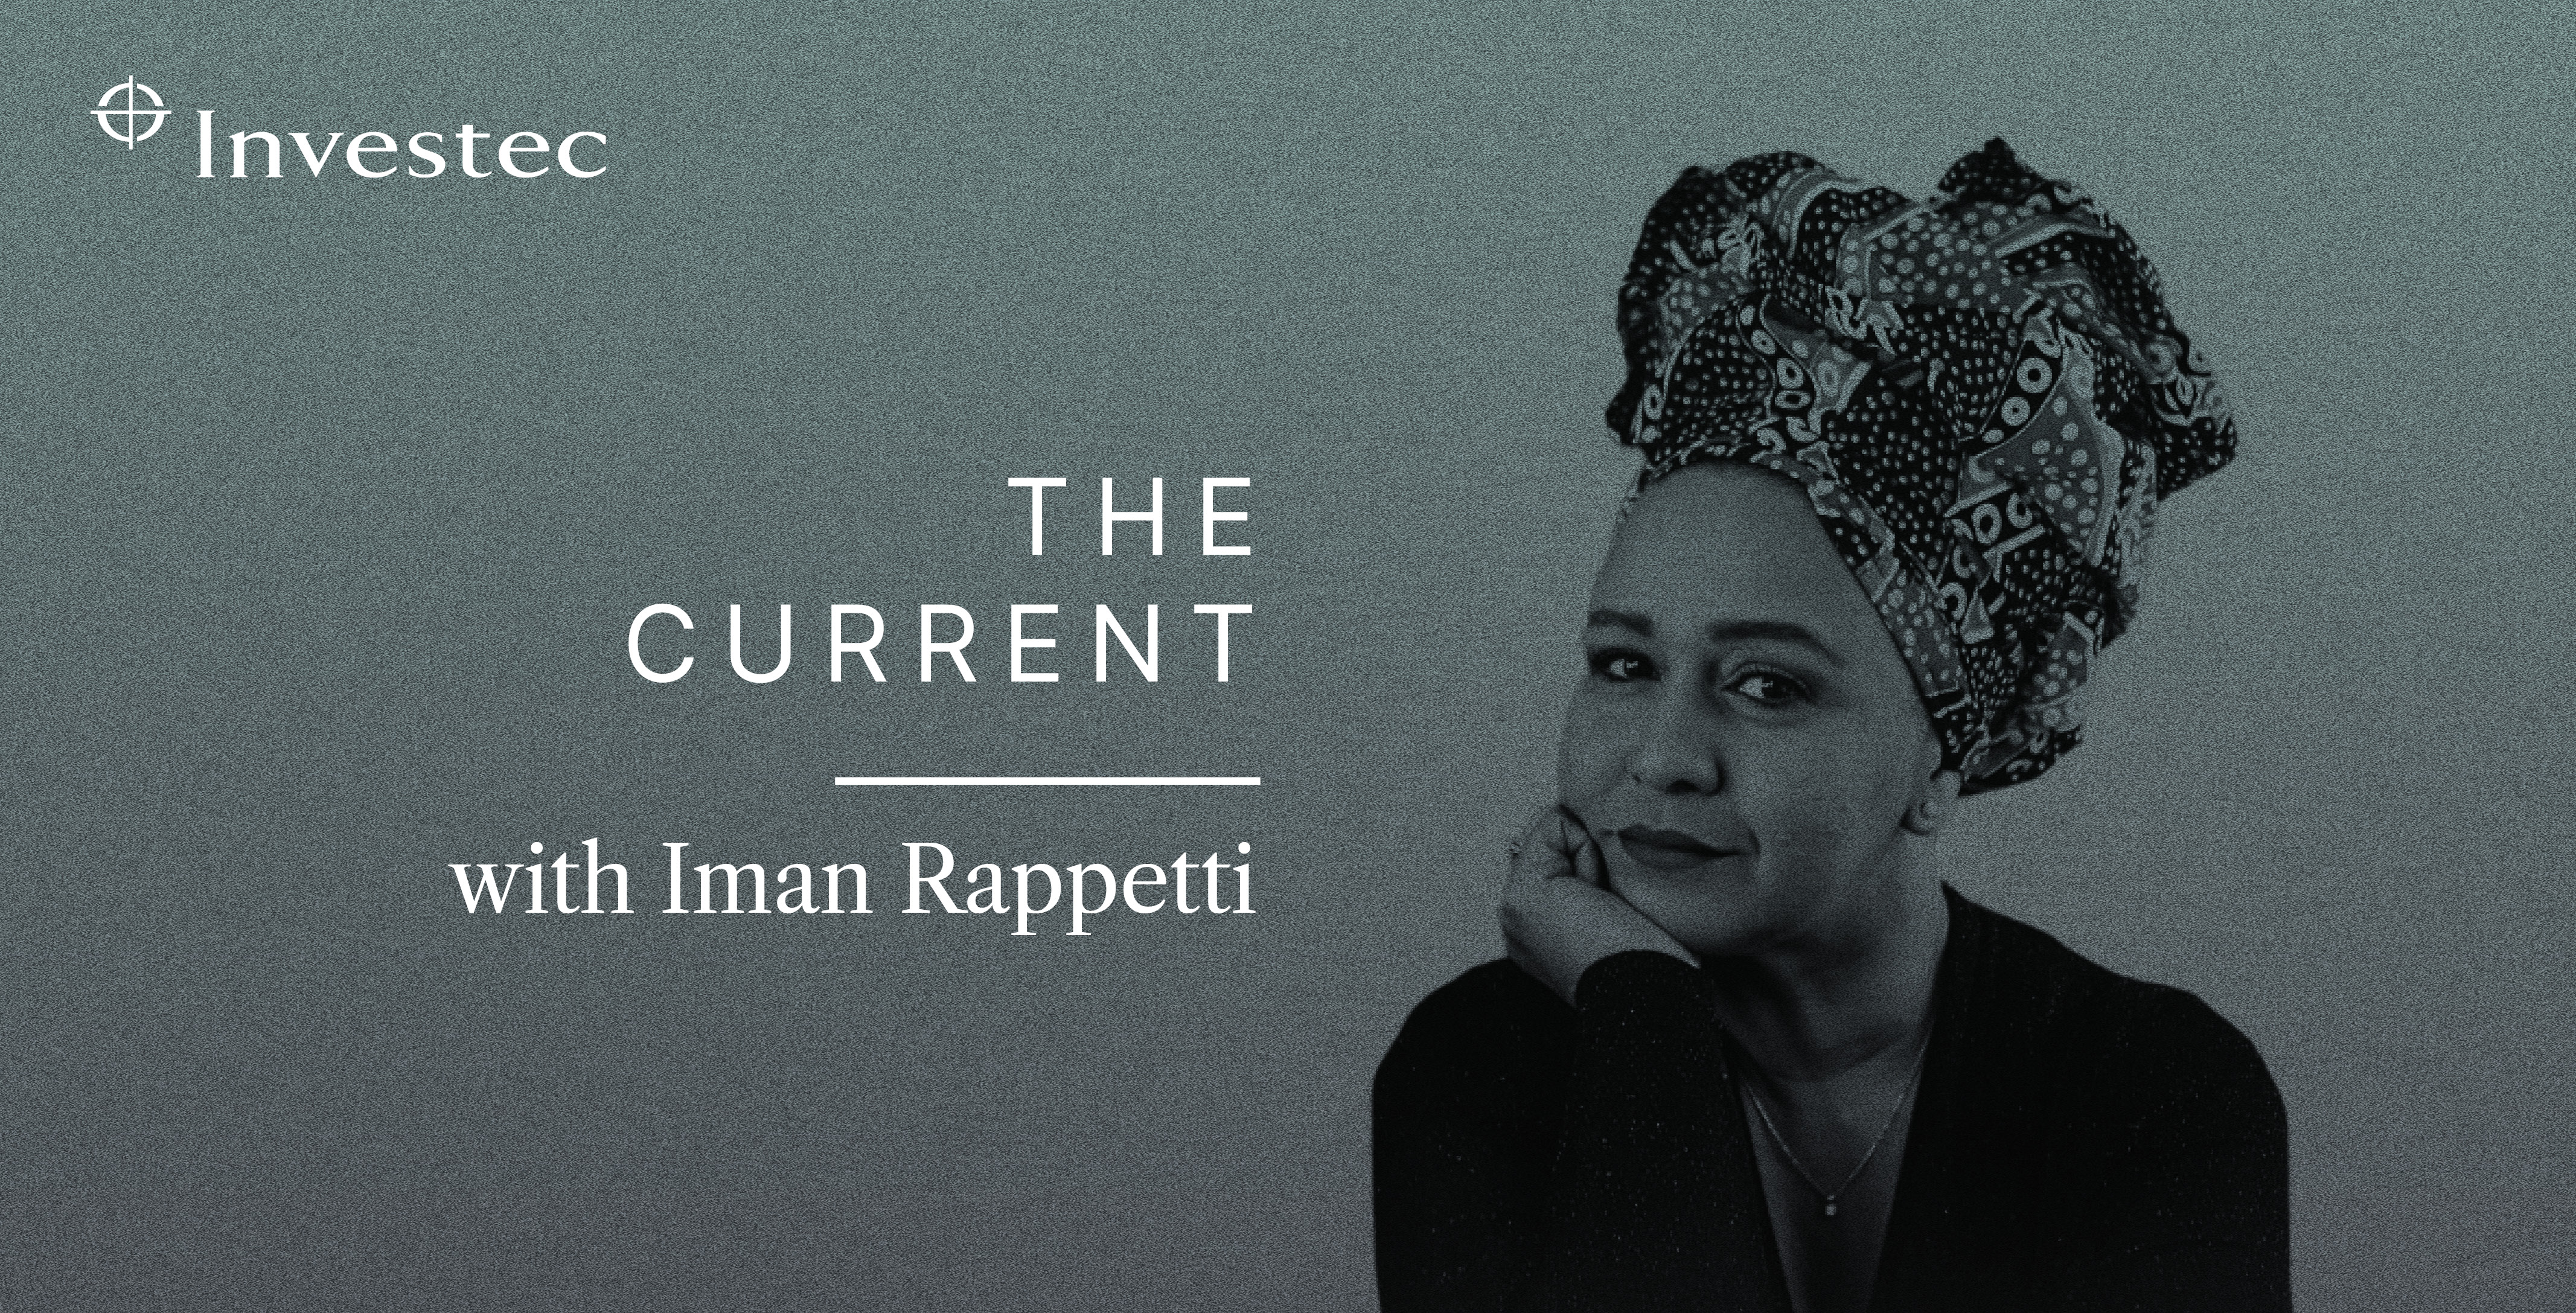 Iman Rappetti, host of Investec's The Current podcast series